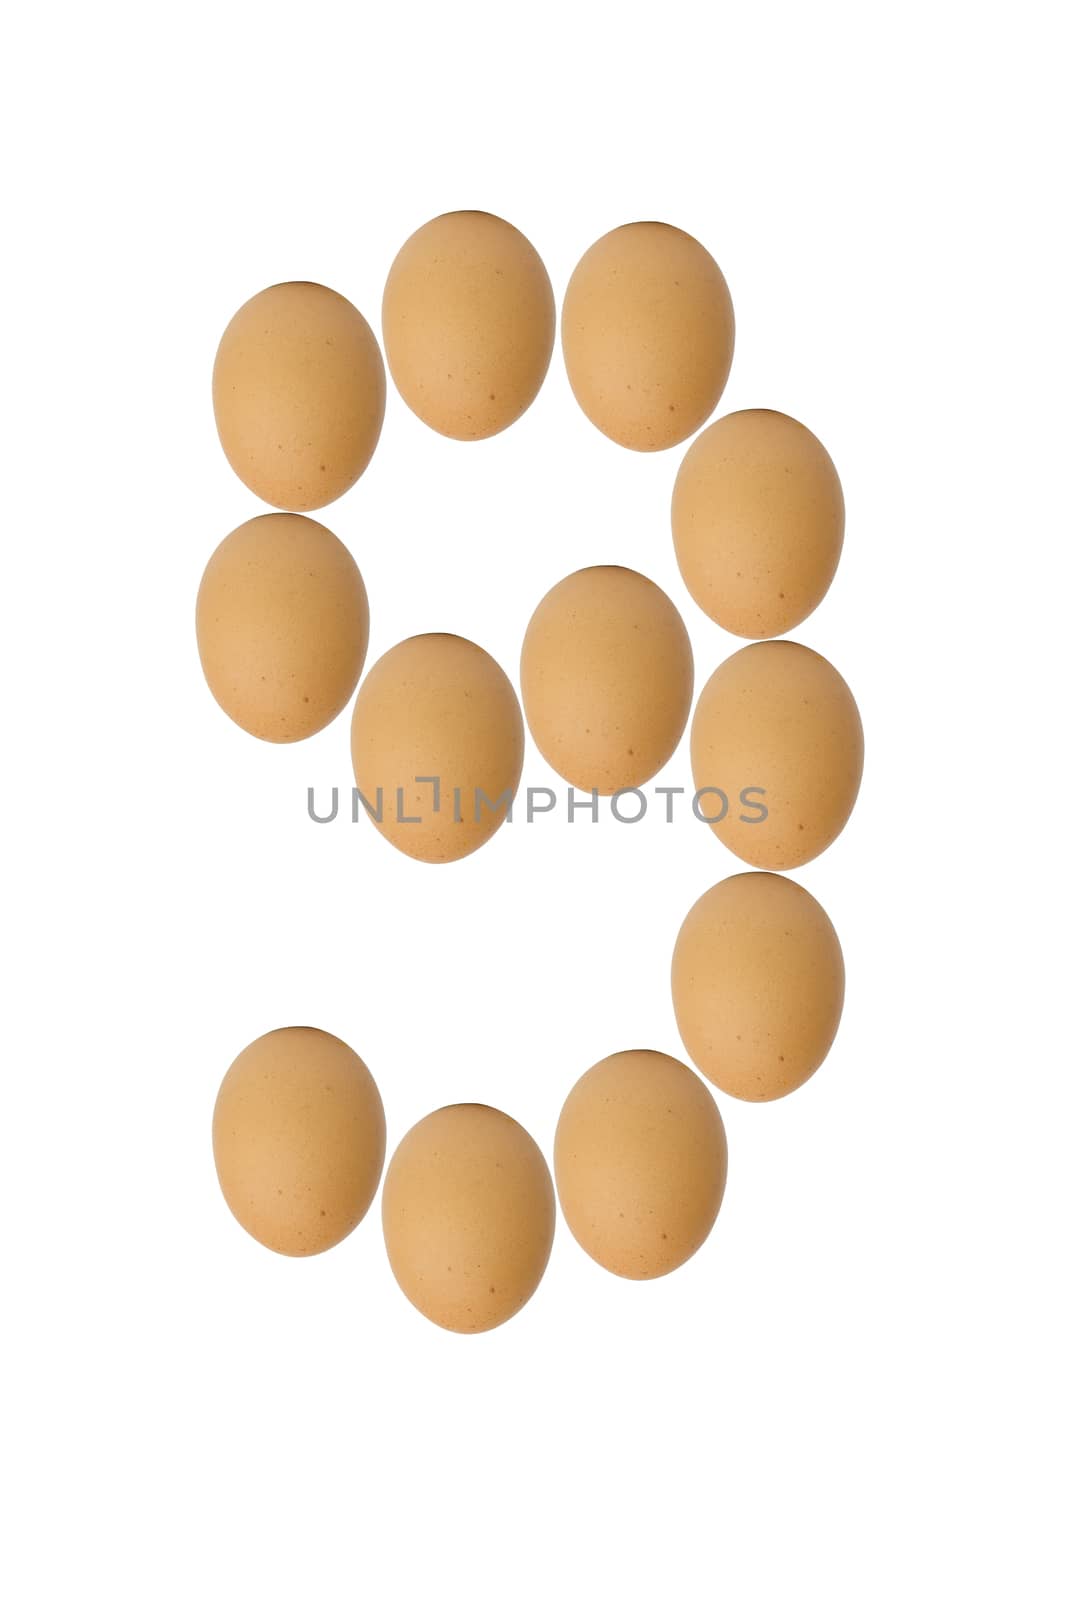 Number 0 to 9 from brown eggs alphabet isolated on white backgro by a3701027